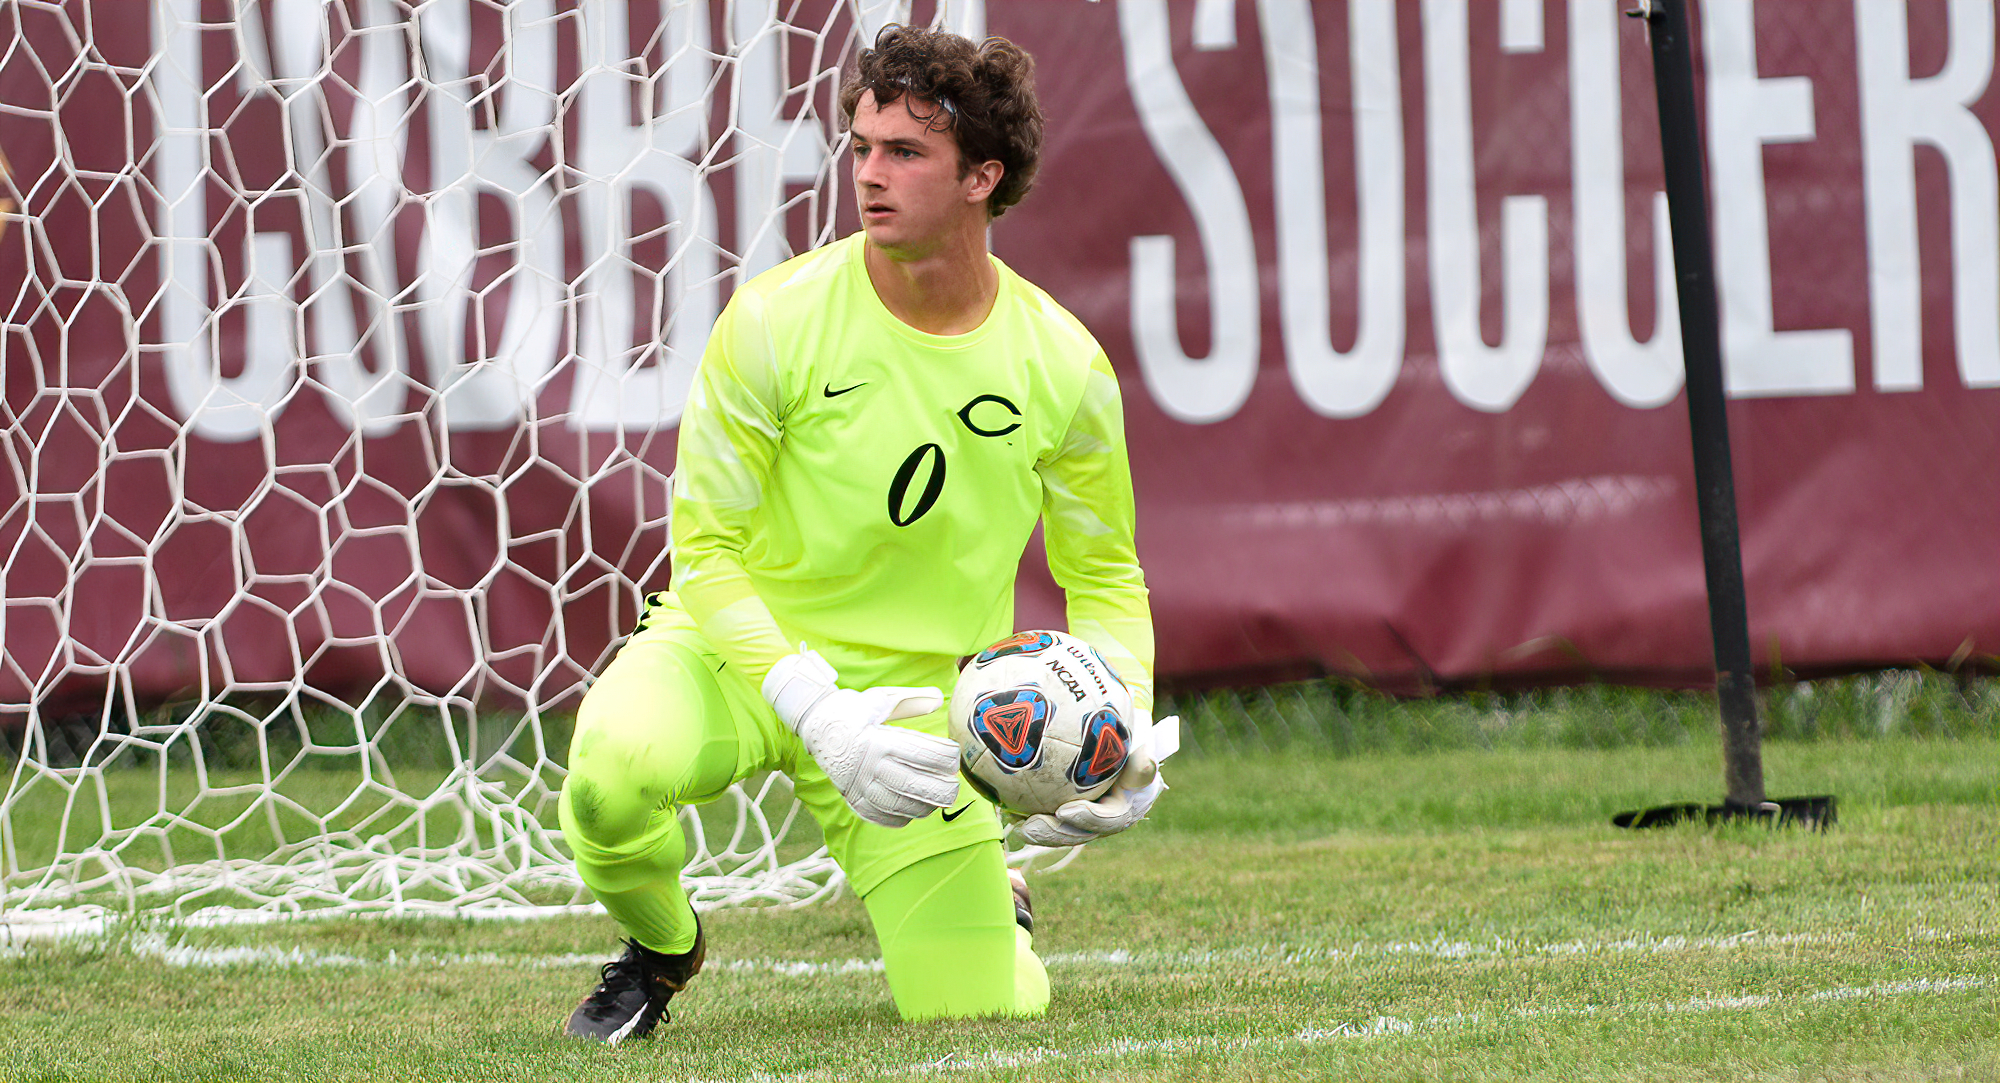 Junior goalie Jensen Waltz made a game-saving stop on a penalty kick in the second half of the Cobbers' 2-1 win at Dubuque in the season opener.